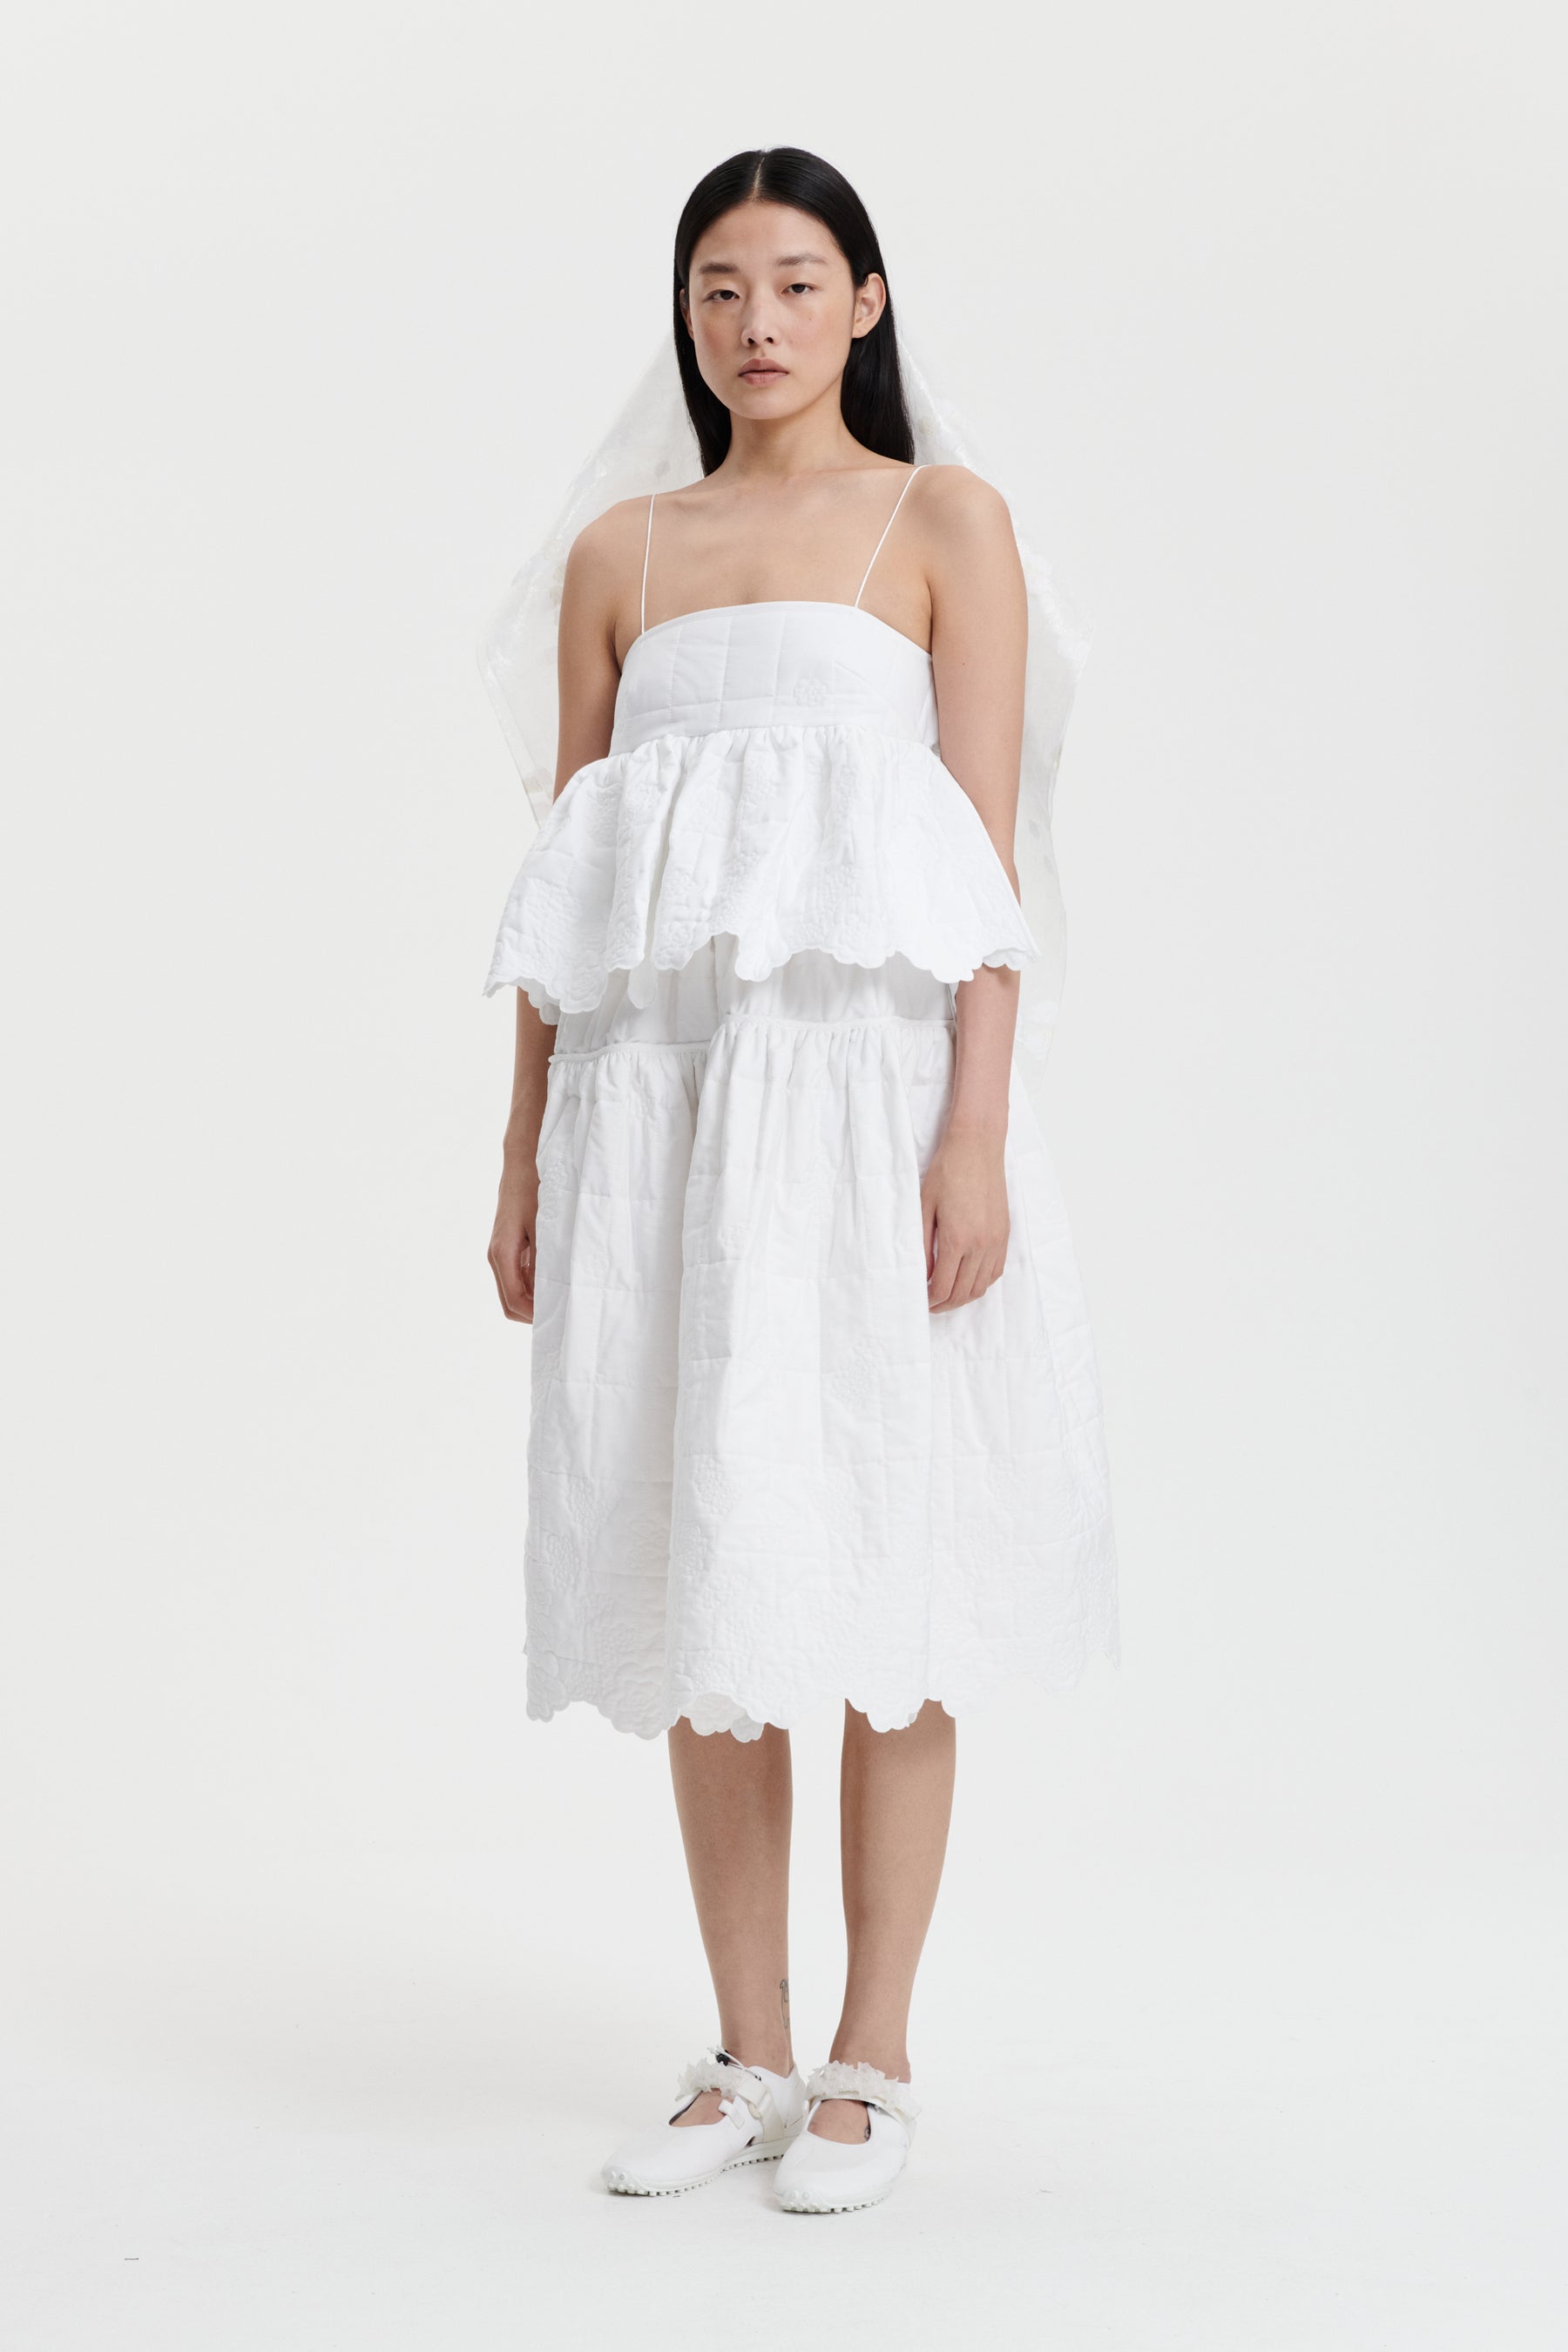 SELENA | TOP QUILTED COTTON WHITE BRIDAL